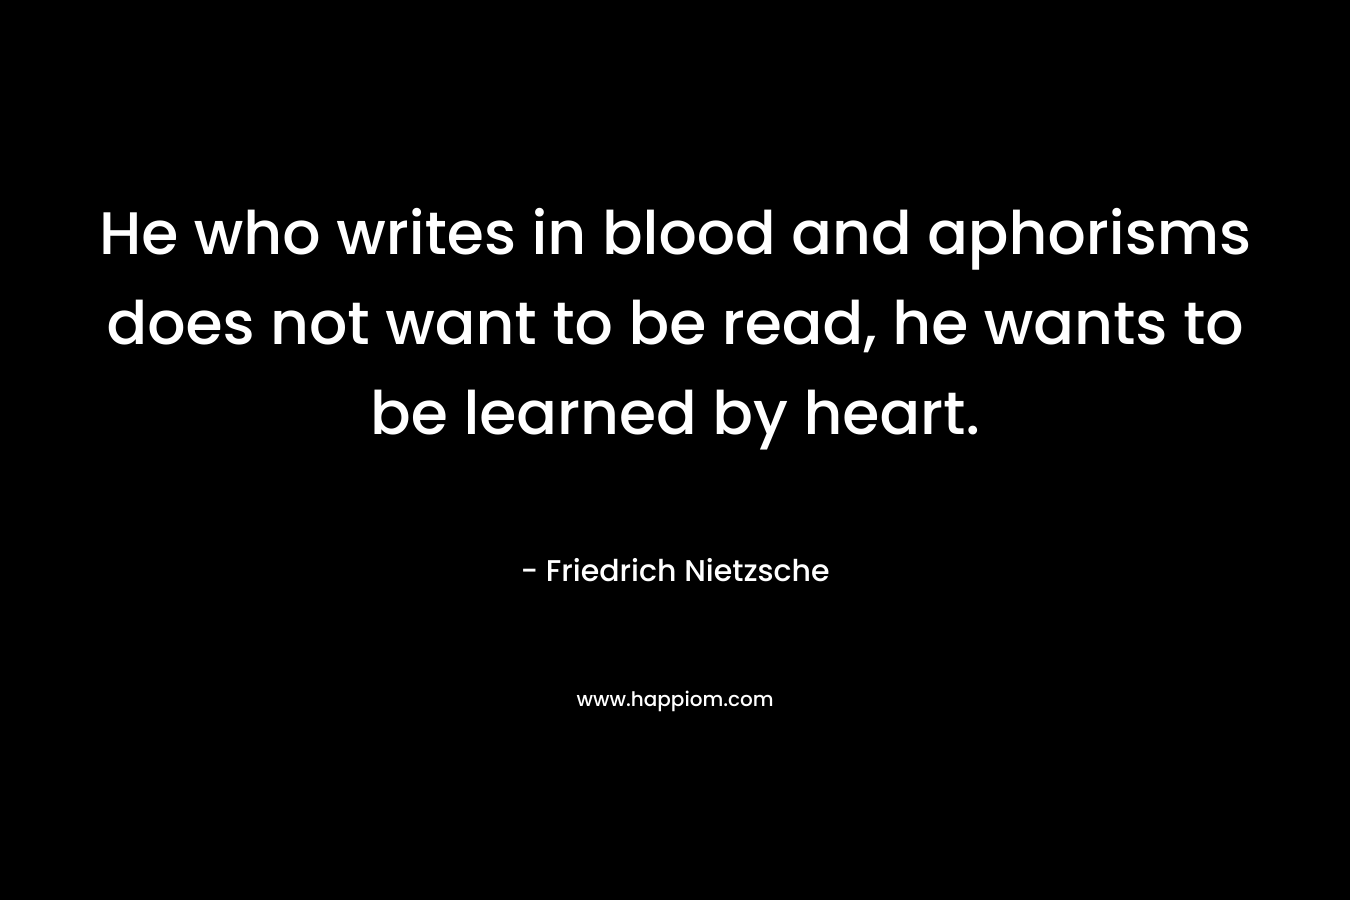 He who writes in blood and aphorisms does not want to be read, he wants to be learned by heart.